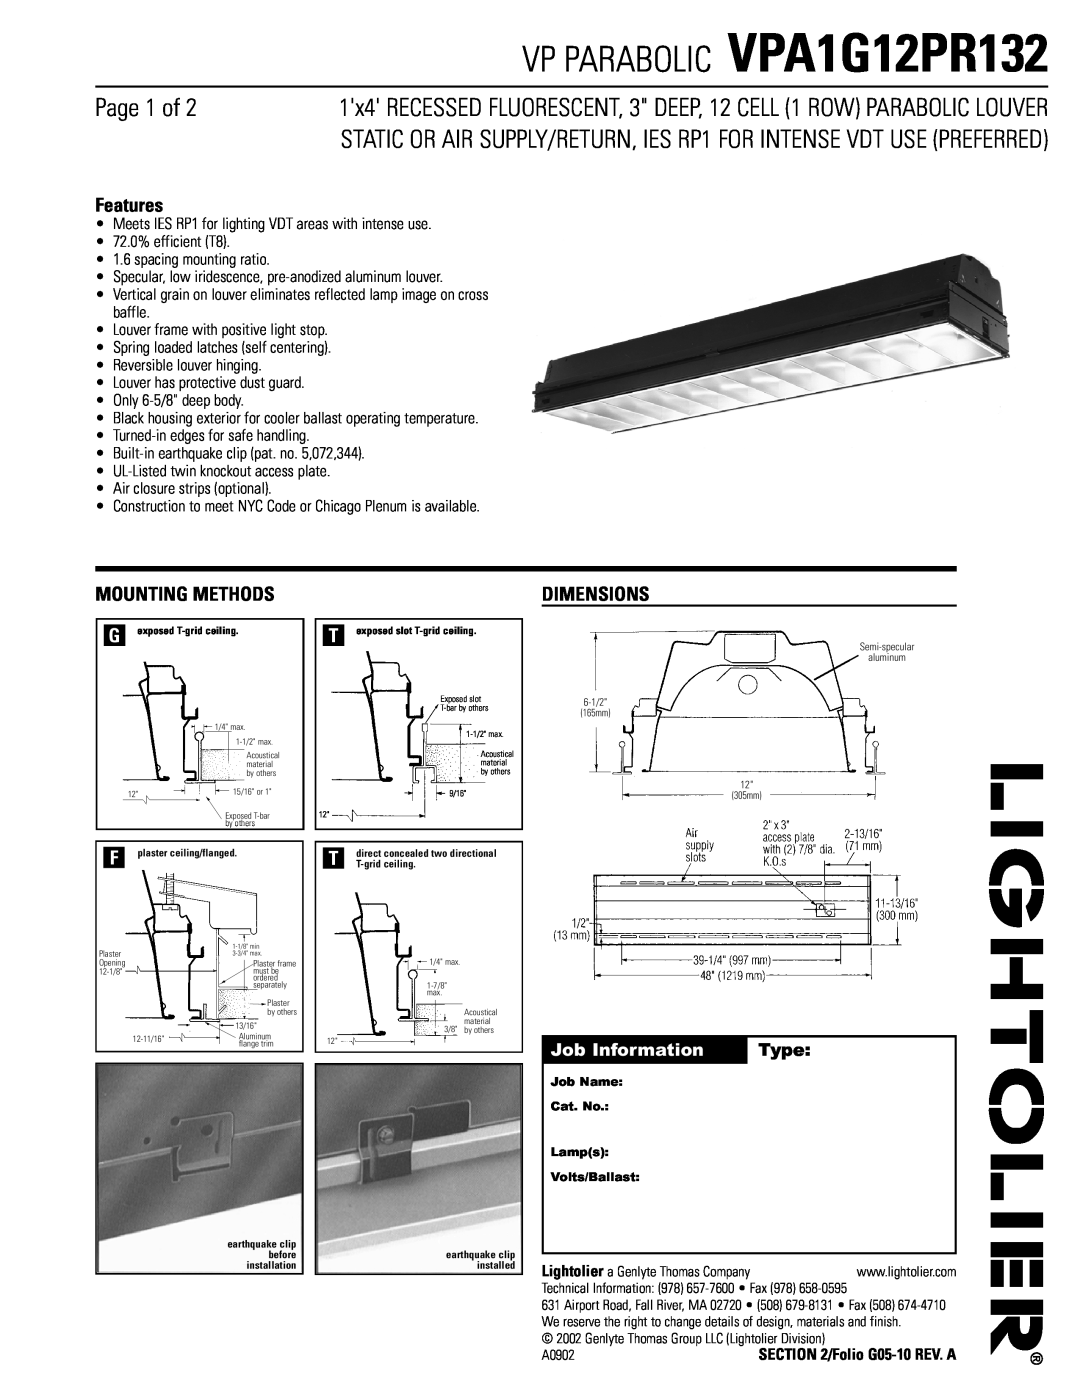 Lightolier dimensions VP PARABOLIC VPA1G12PR132, Page 1 of, Features, Mounting Methods, Dimensions, Job Information 